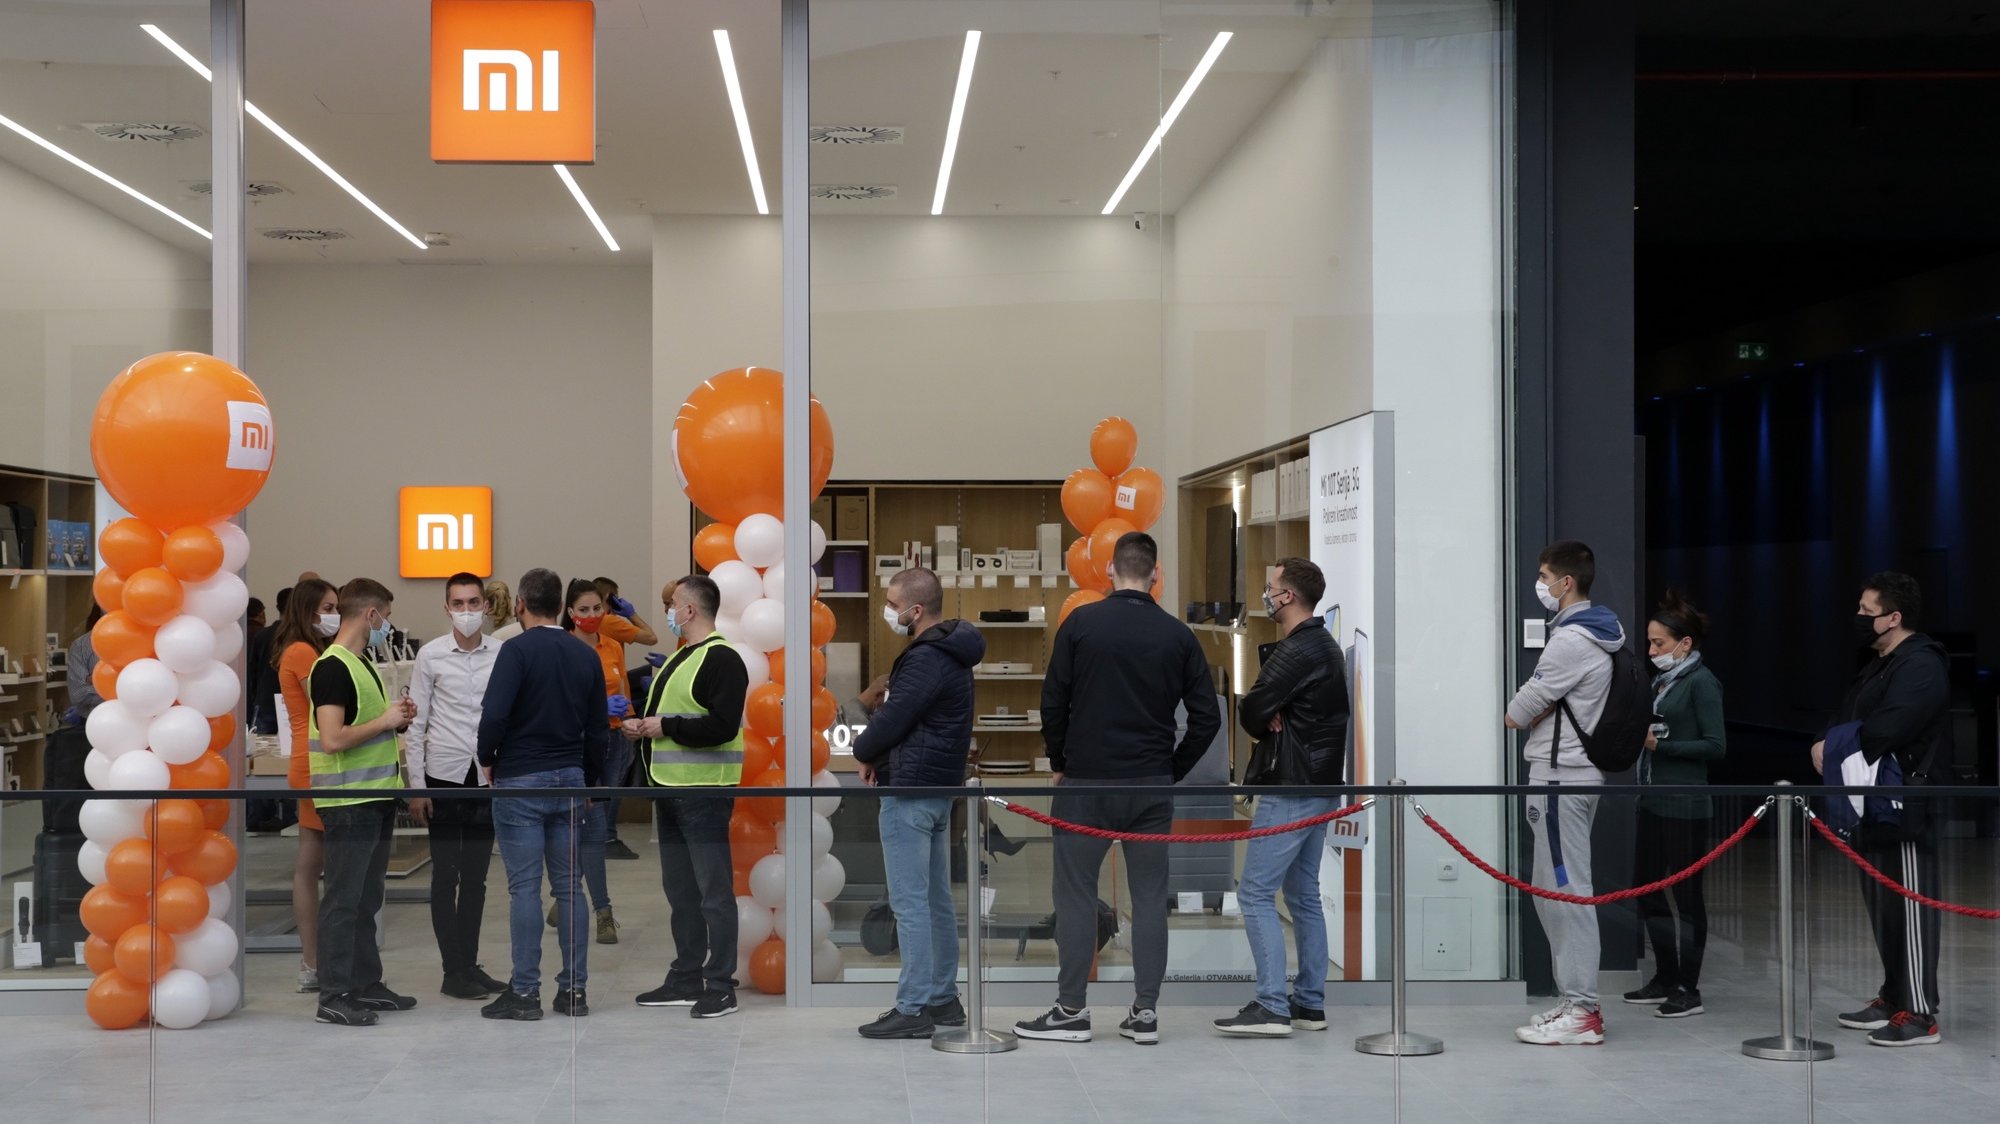 epa08786319 Shoppers wait in line in front of a Xiaomi store at the Galerija Belgrade shopping mall in Belgrade, Serbia, 30 October 2020. Galerija shopping mall is a new 300,000 square-meter retail property funded by Eagle Hills, the Abu Dhabi based private investment and real estate development company. Galerija Belgrade claims to be the largest entertainment, shopping, and gourmet destination in the Southern-Eastern Europe&#039;s  region.  EPA/ANDREJ CUKIC